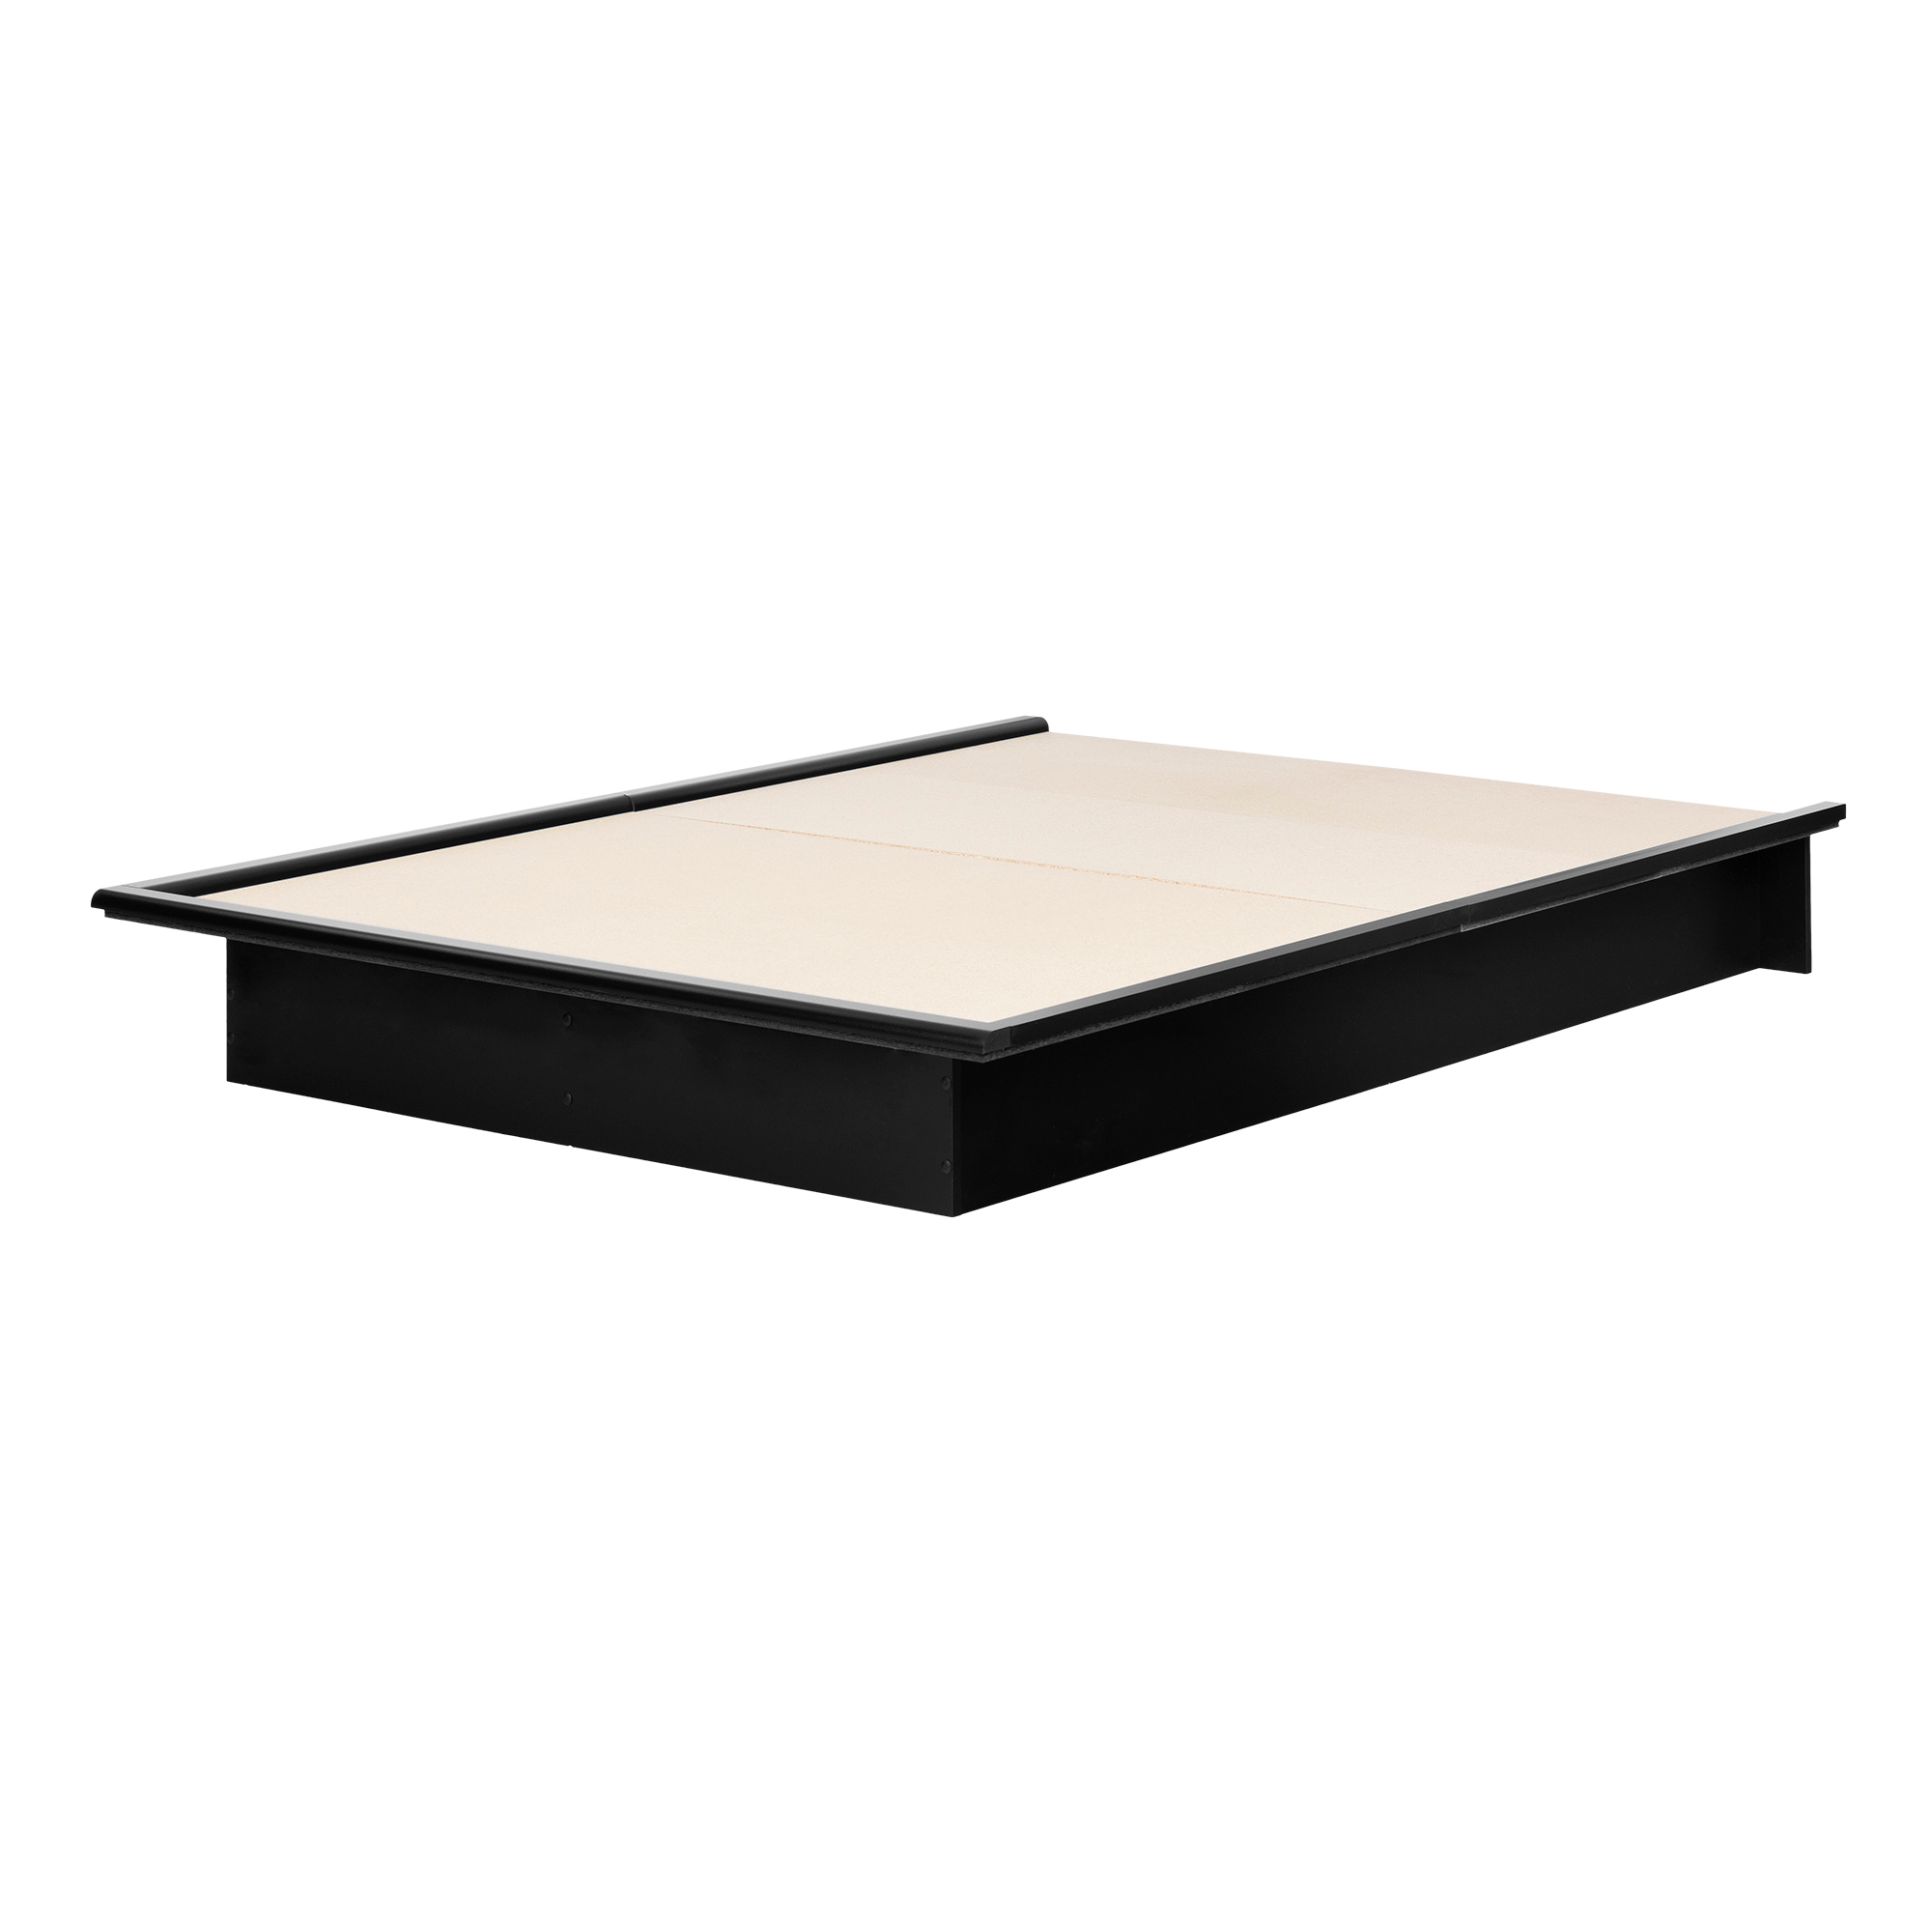 South Shore Basics Platform Bed with Molding, Pure Black, Full - image 2 of 7